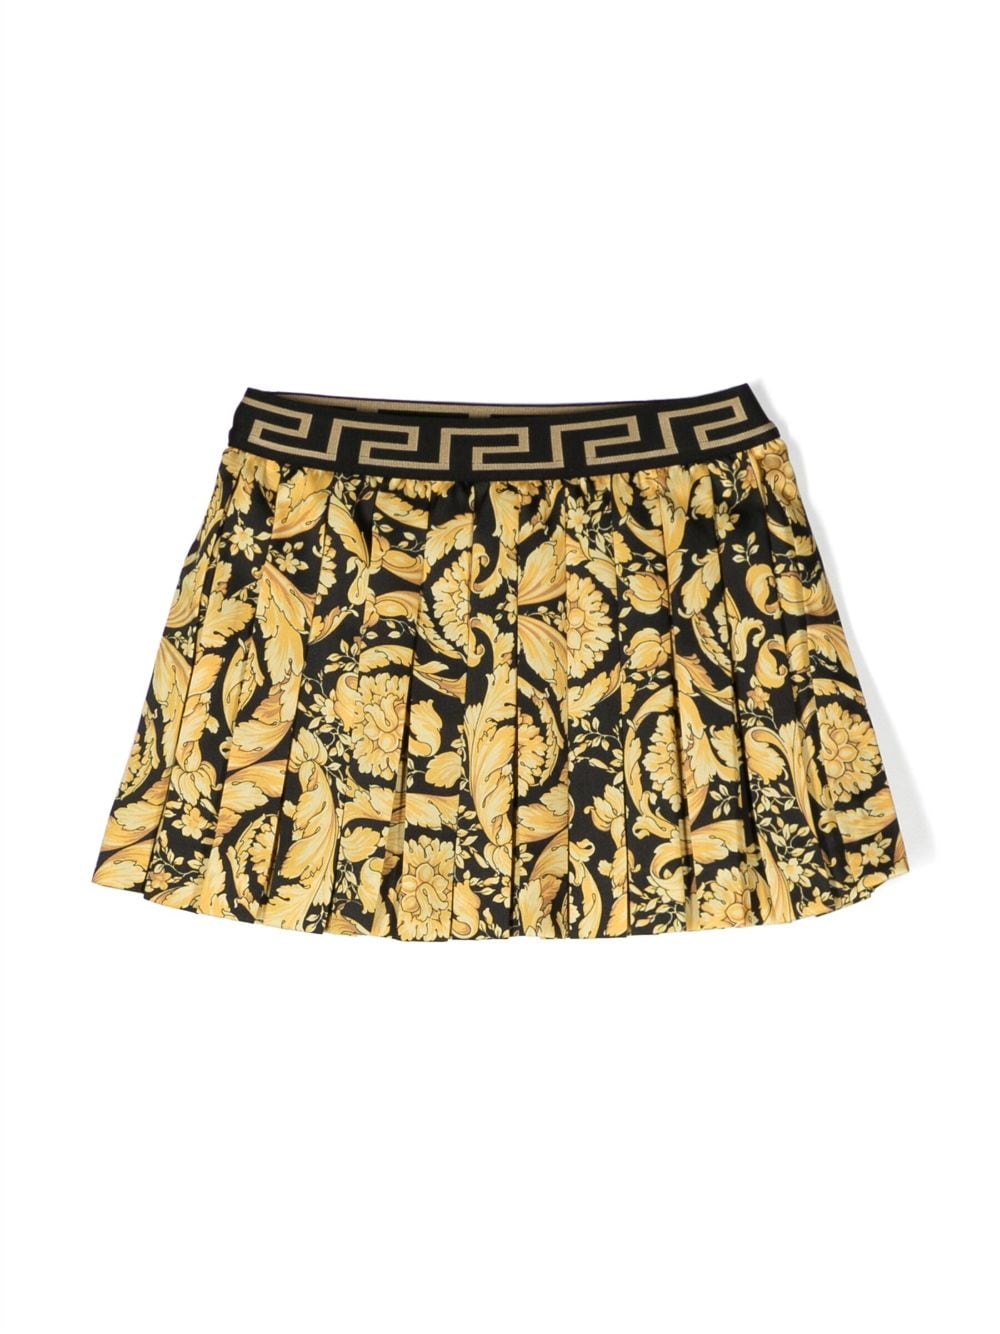 Black and gold skirt for girls with logo